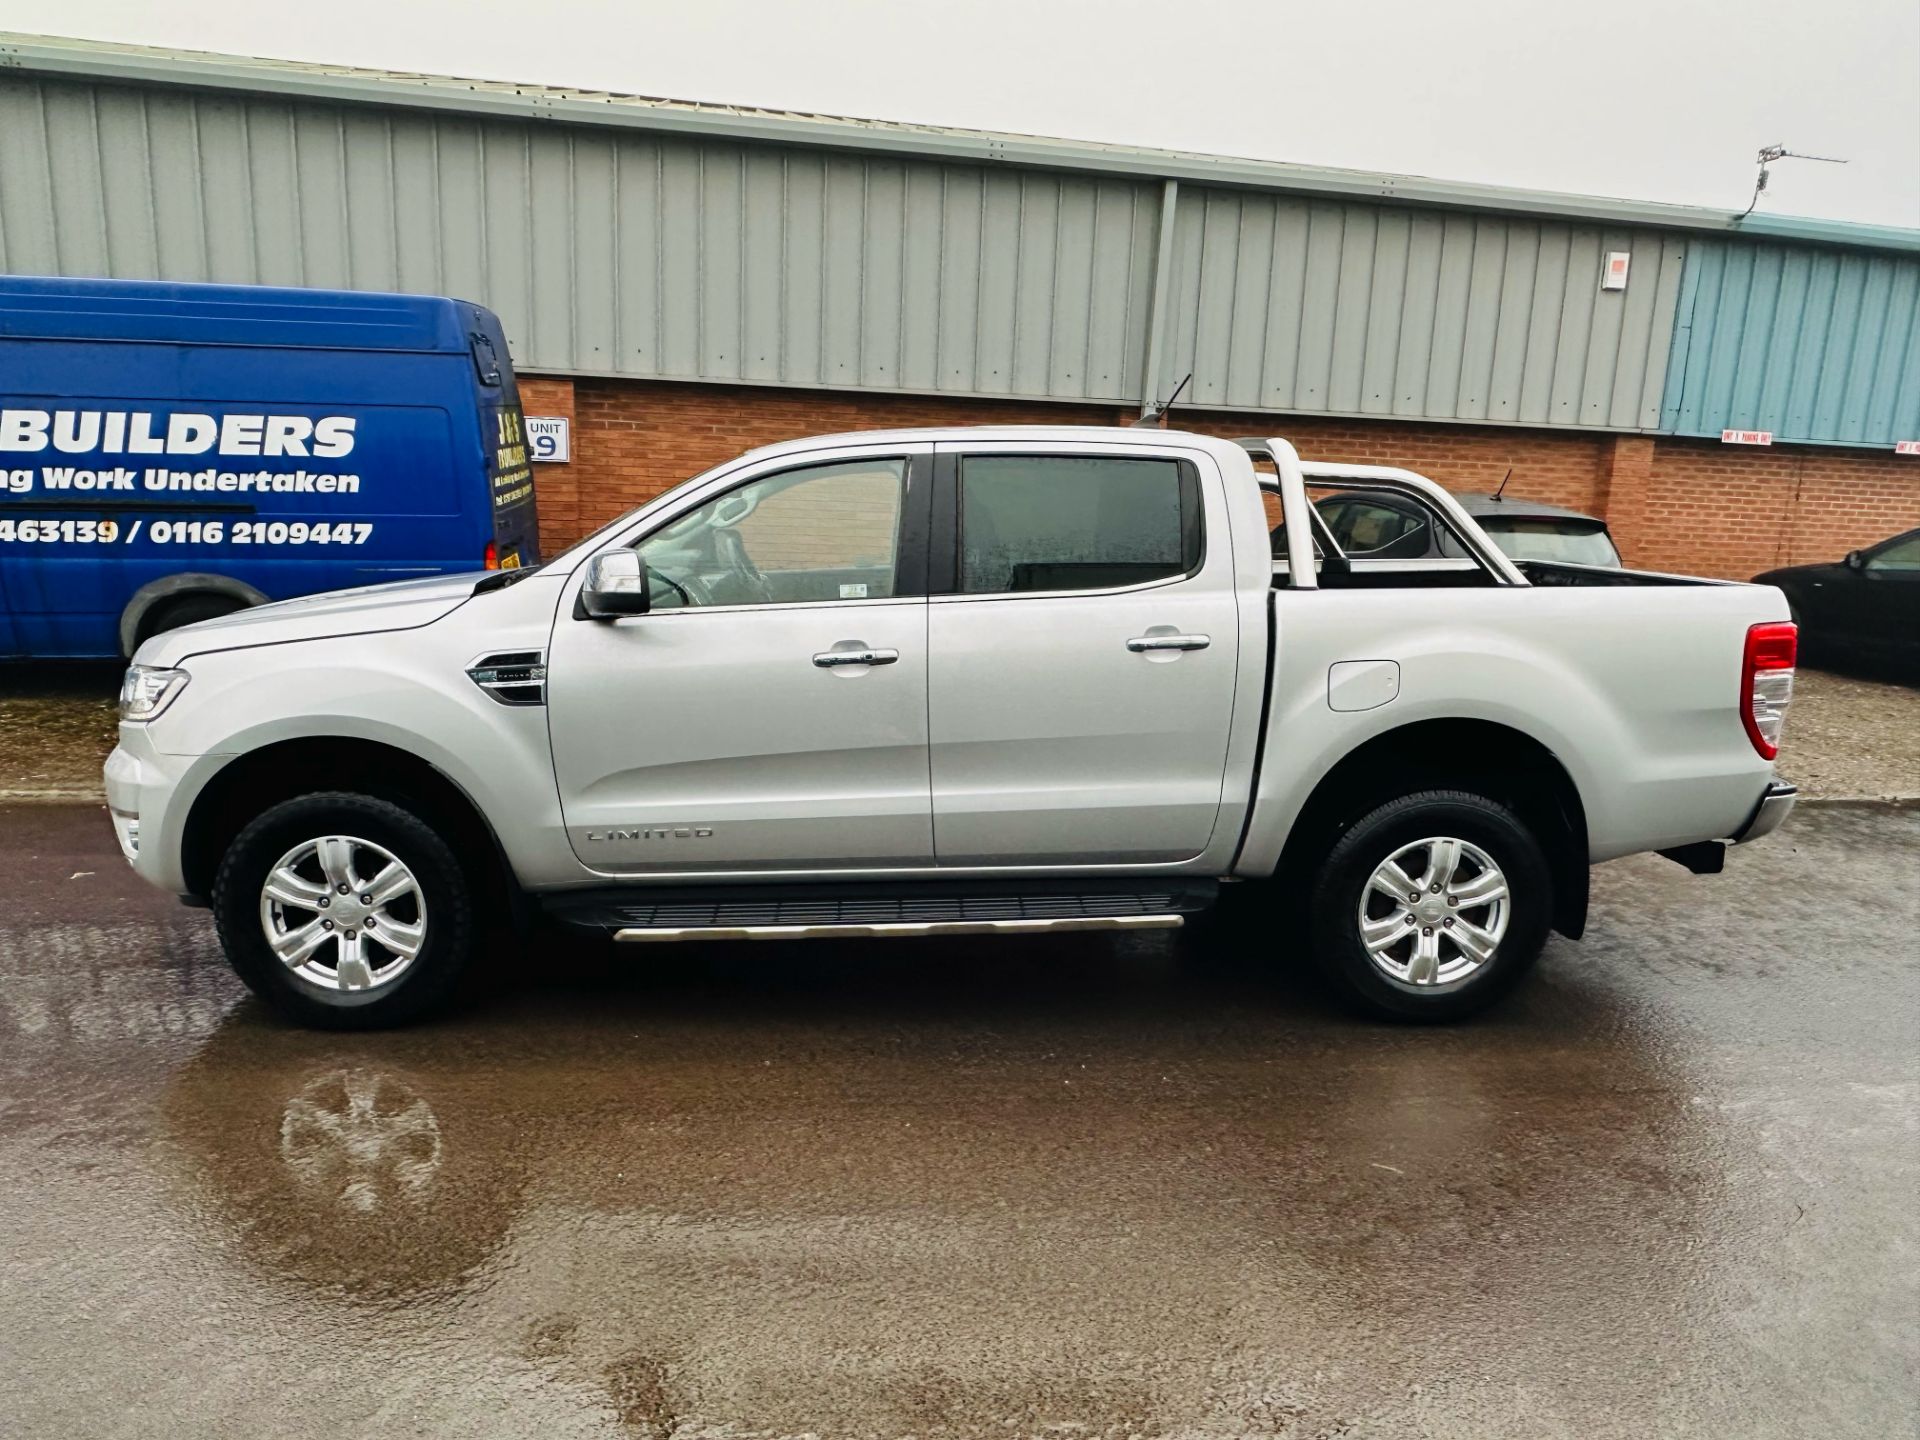 Ford Ranger 2.0 TDCI LIMITED 170BHP Auto SS (2021 Model) Huge Spec -Sat Nav Leather 35k Miles Only - Image 7 of 44